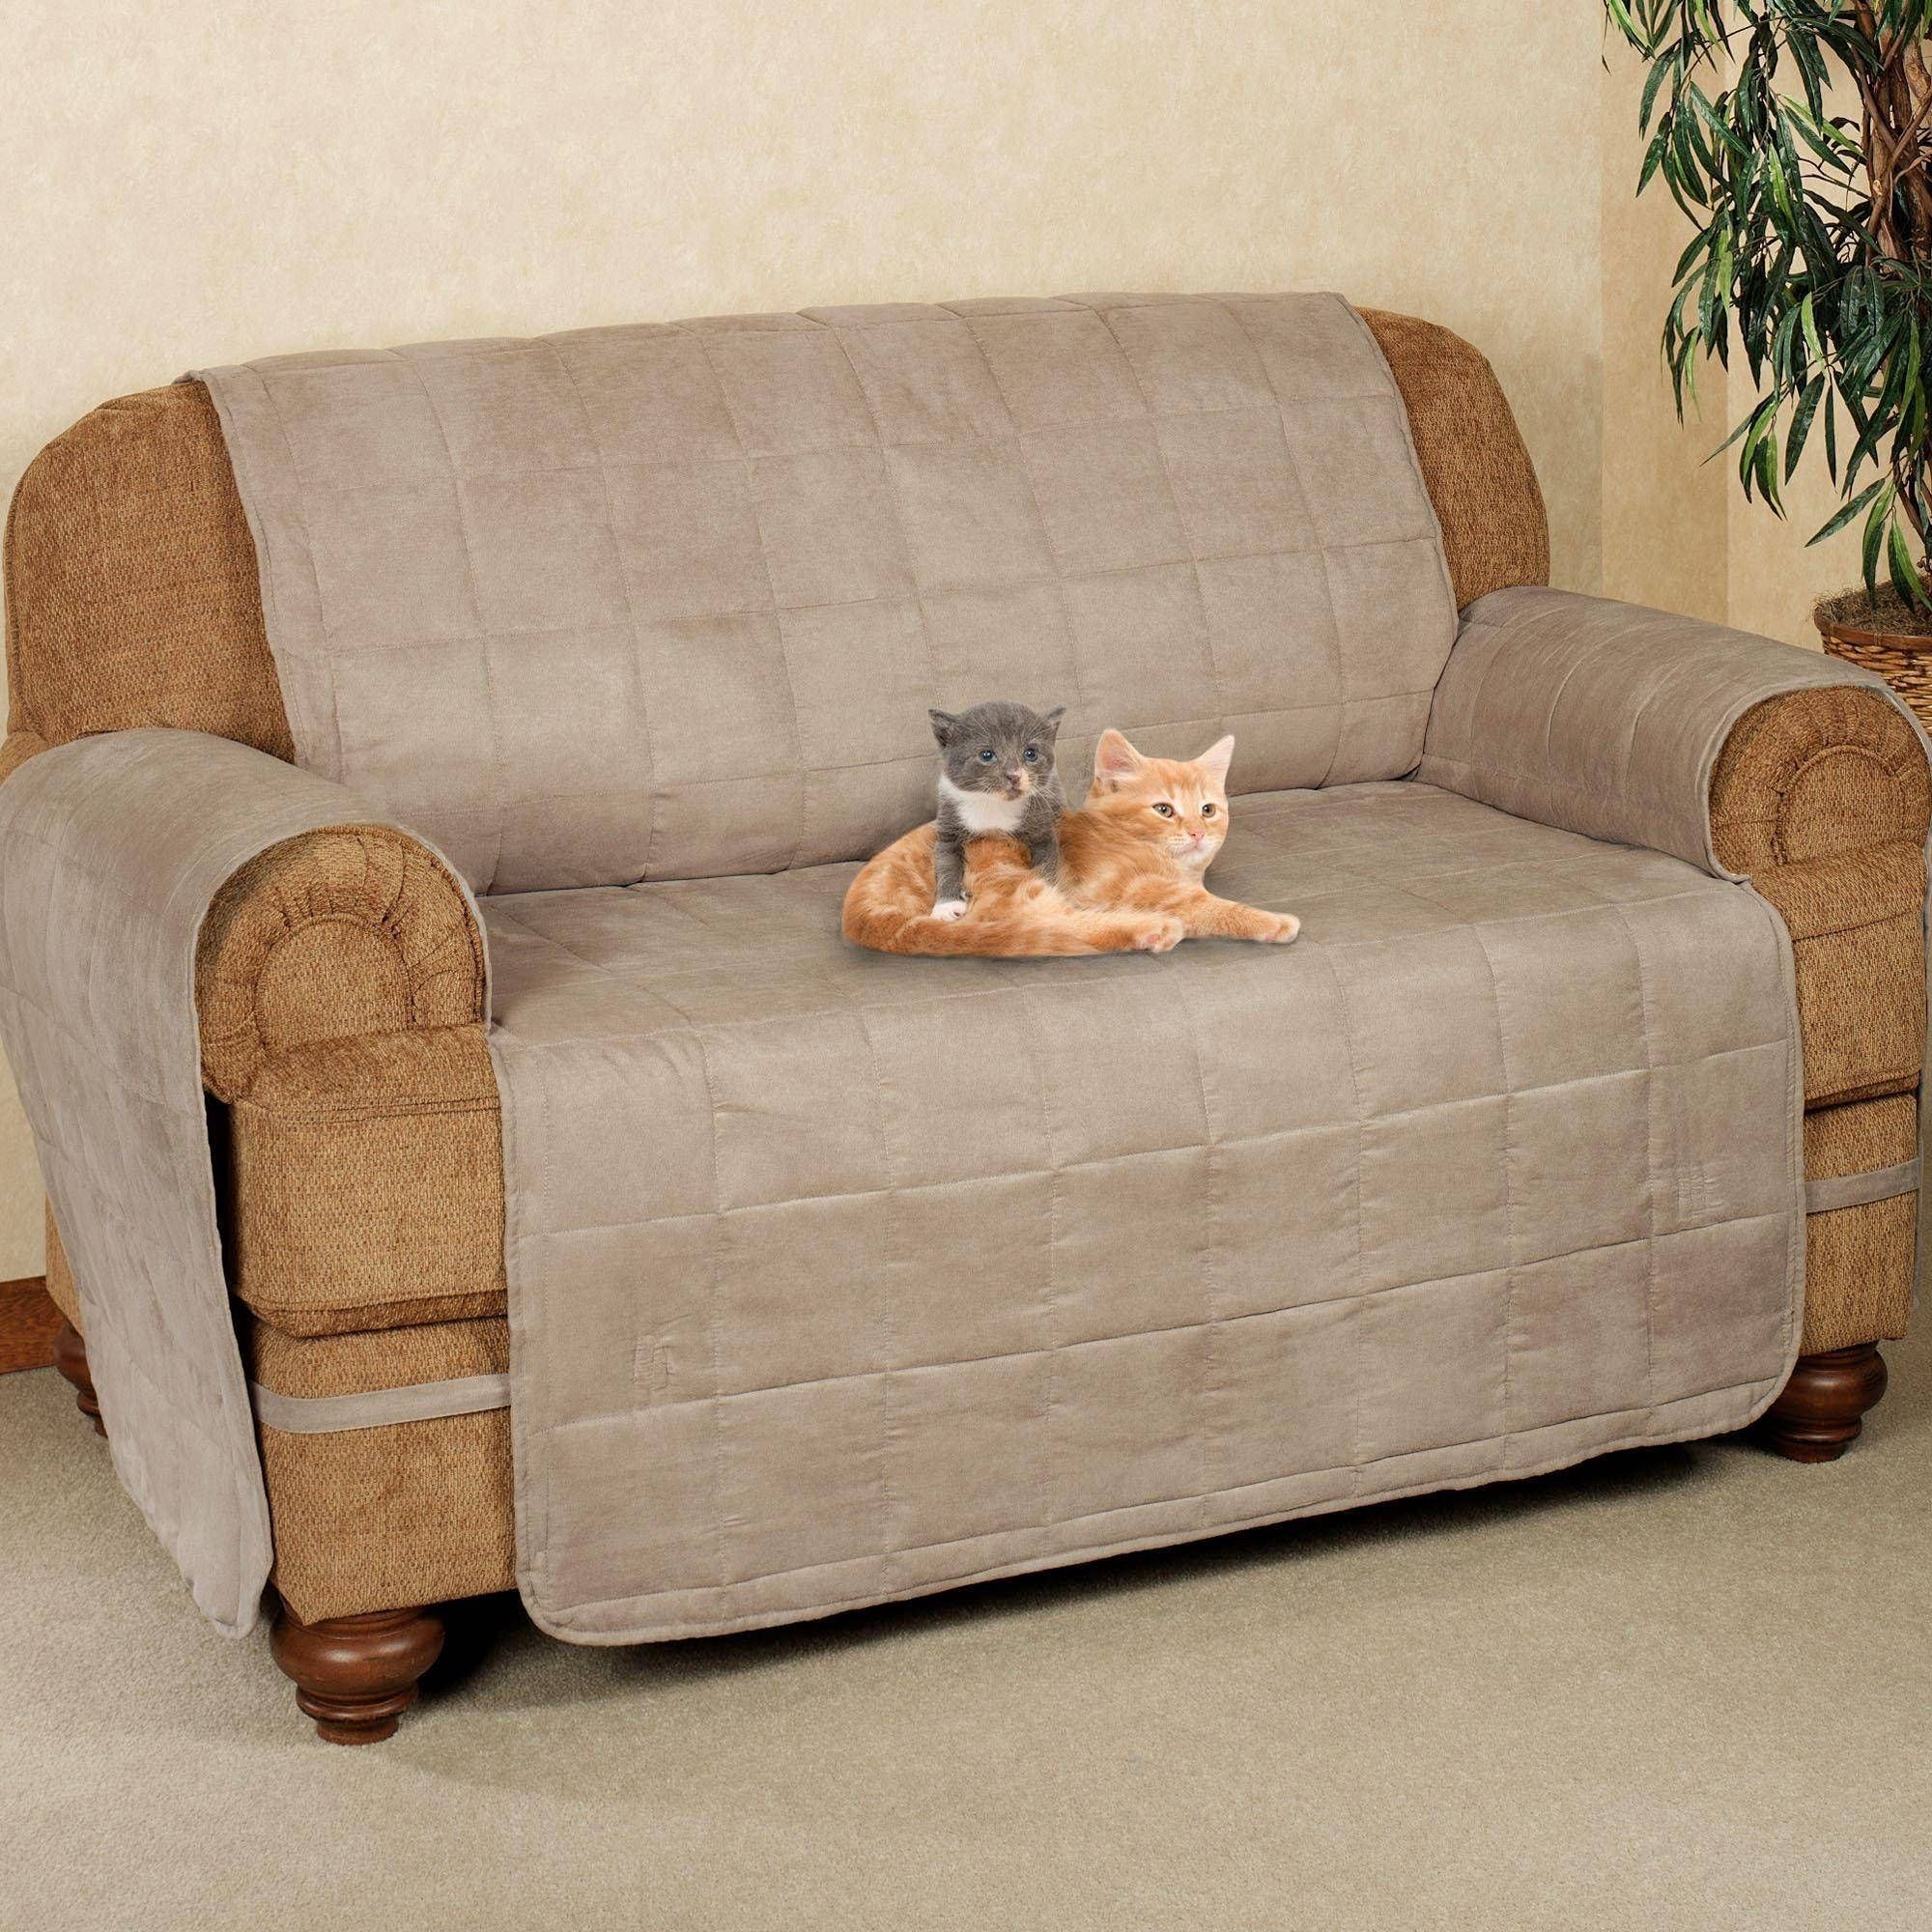 20 Collection Of Pet Proof Sofa Covers Sofa Ideas Within Cat Proof Sofas 